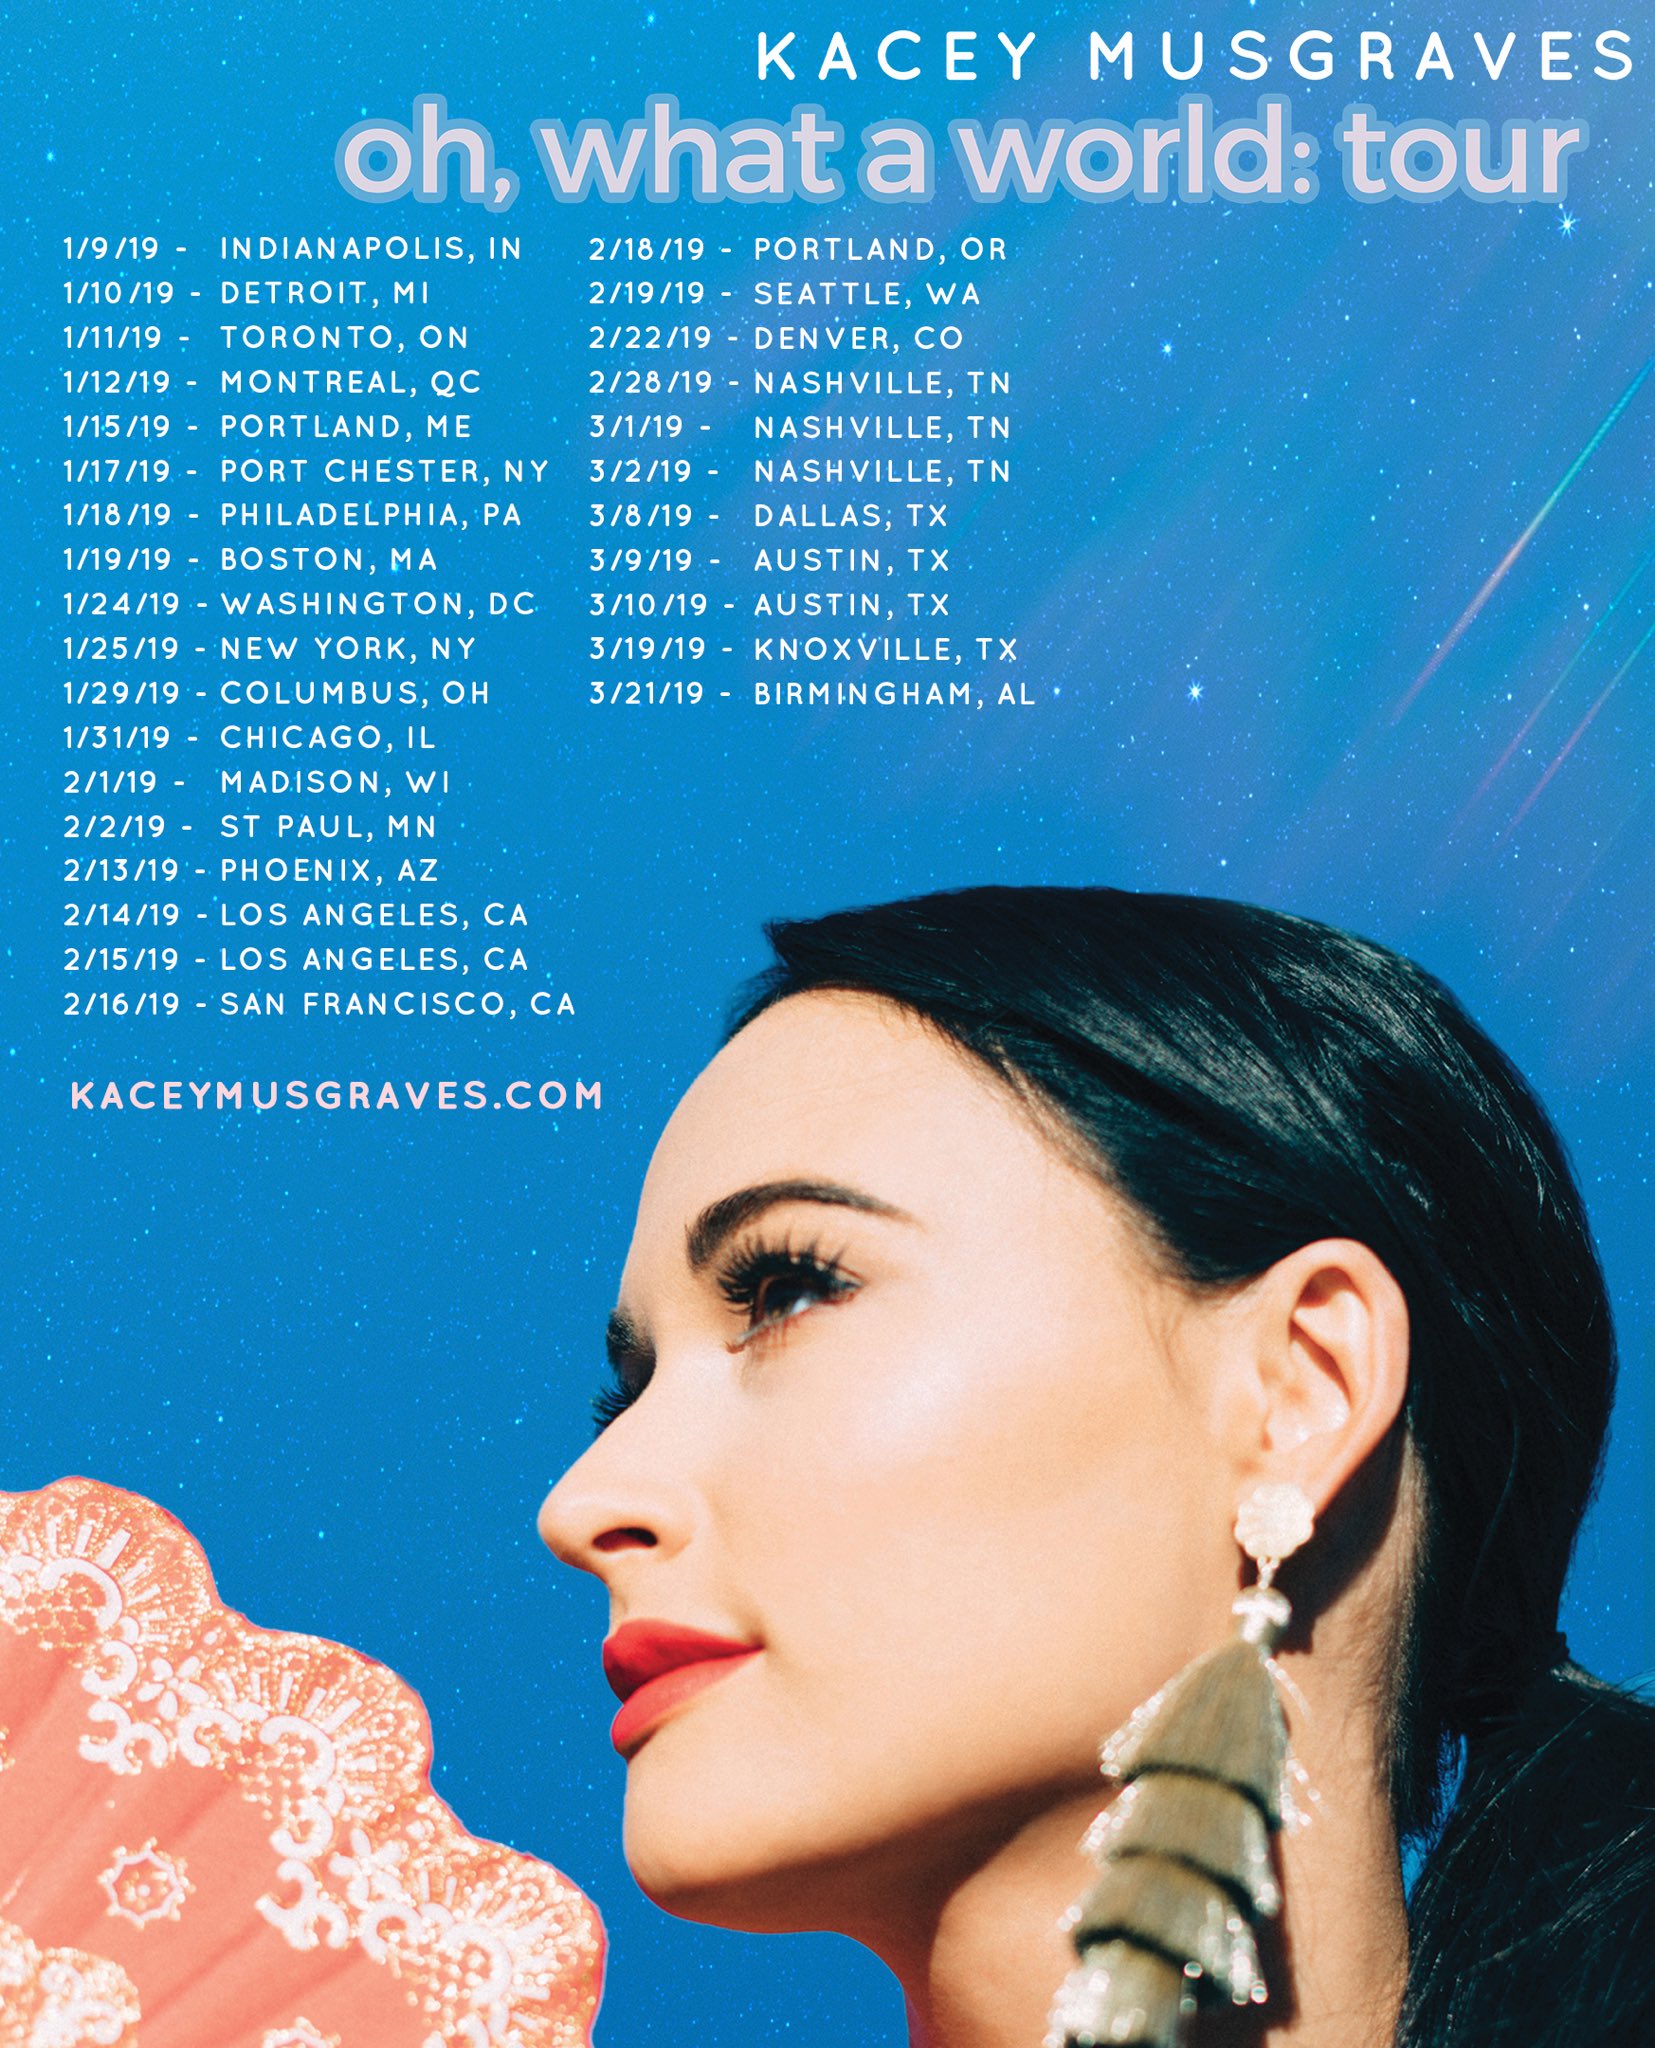 Kacey Musgraves Announces North American Tour